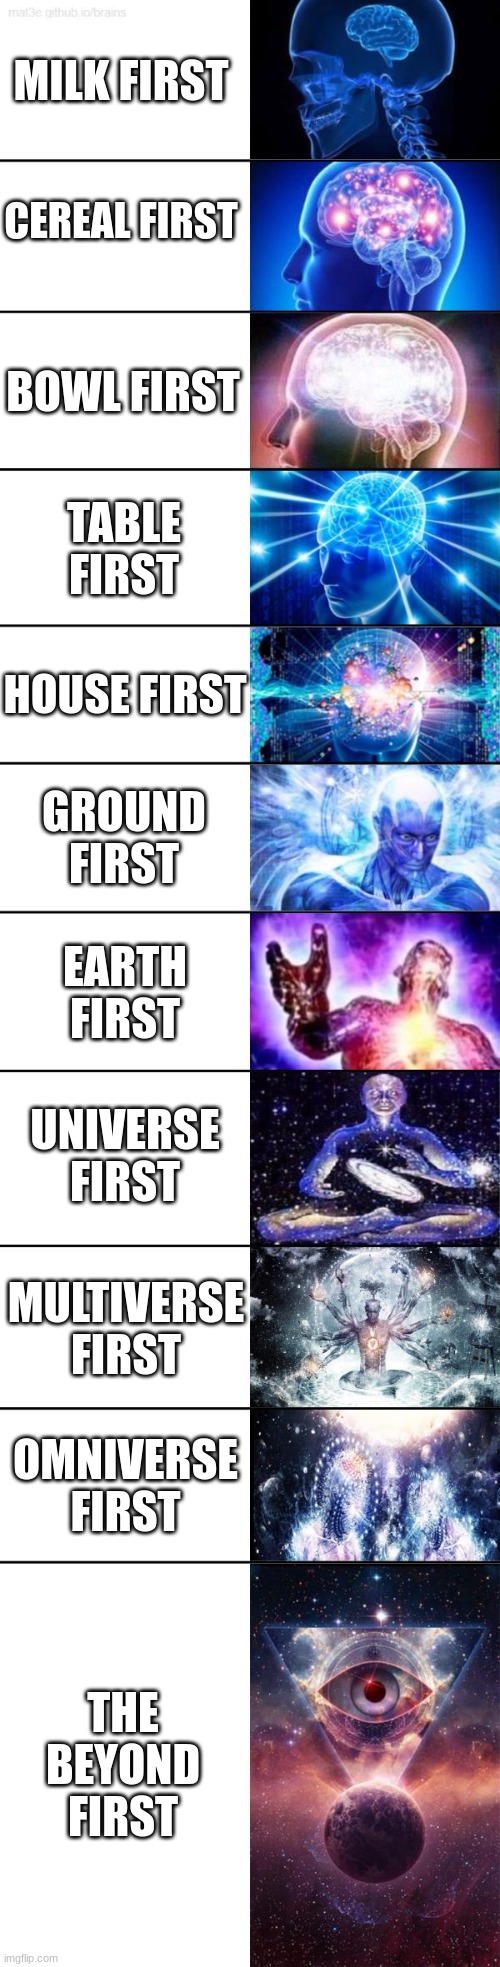 g rh8p9 8hp9b giho | MILK FIRST; CEREAL FIRST; BOWL FIRST; TABLE FIRST; HOUSE FIRST; GROUND FIRST; EARTH FIRST; UNIVERSE FIRST; MULTIVERSE FIRST; OMNIVERSE FIRST; THE BEYOND FIRST | image tagged in extended expanding brain meme,memes,cereal | made w/ Imgflip meme maker